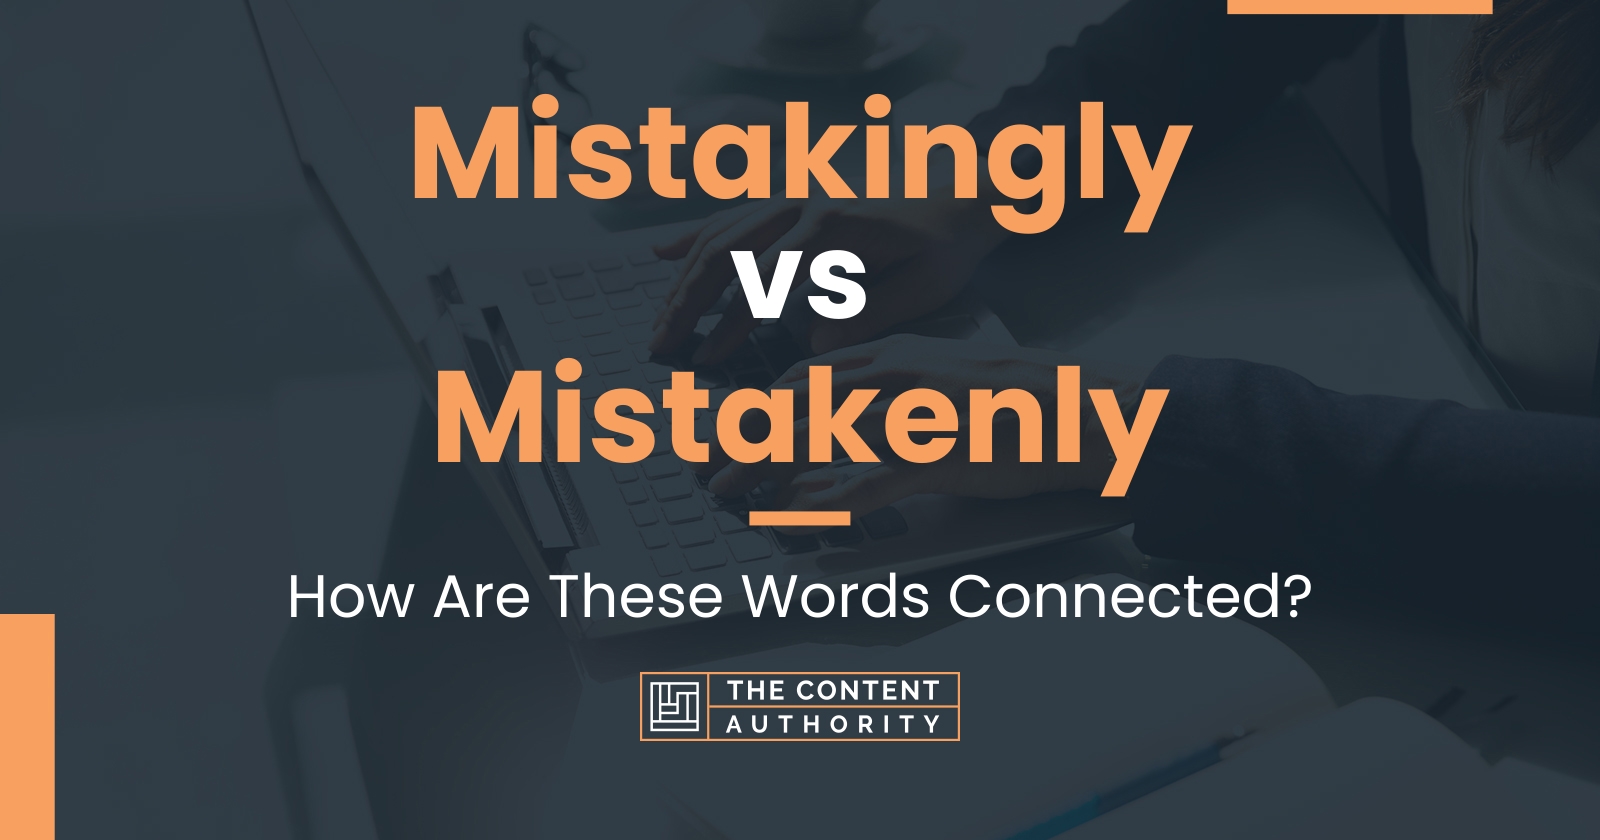 Mistakingly vs Mistakenly: How Are These Words Connected?